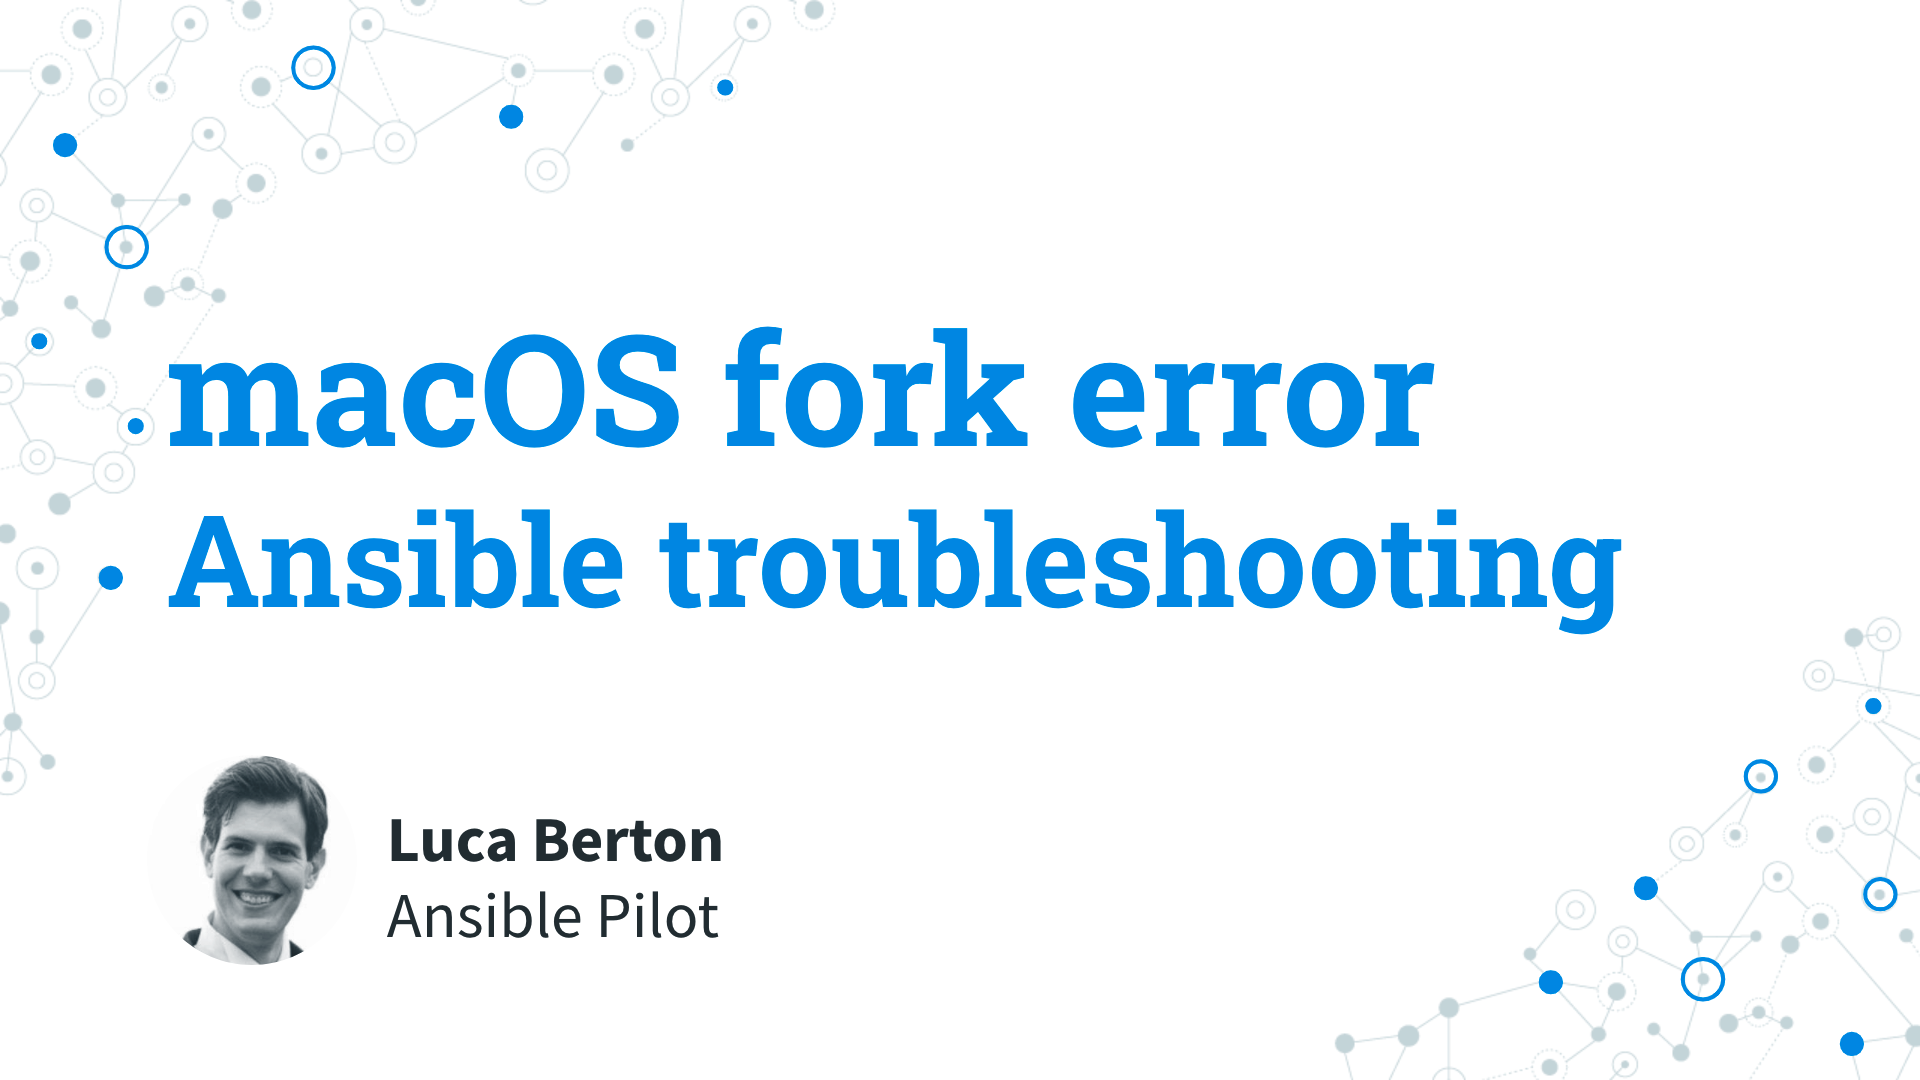 Ansible troubleshooting - macOS fork error